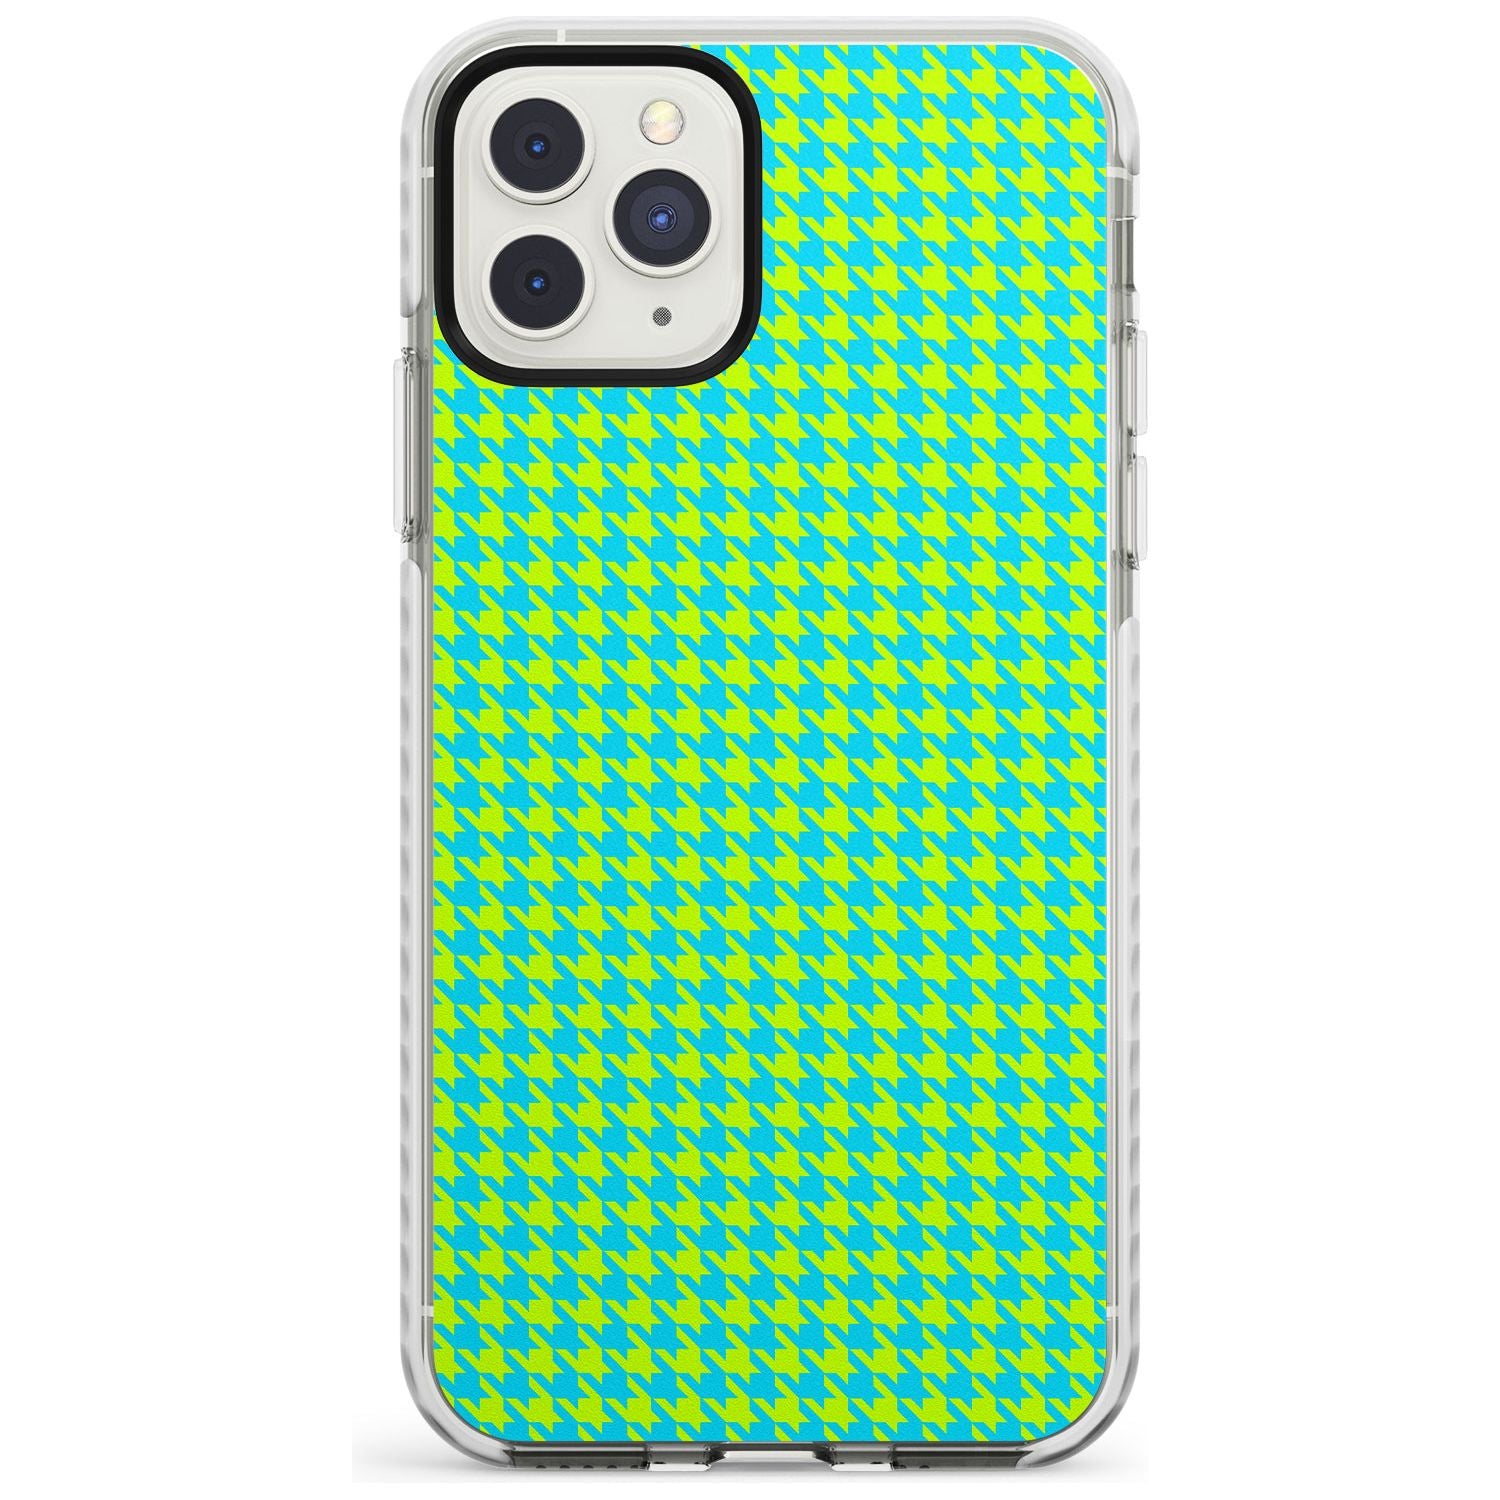 Neon Lime & Turquoise Houndstooth Pattern Impact Phone Case for iPhone 11 Pro Max